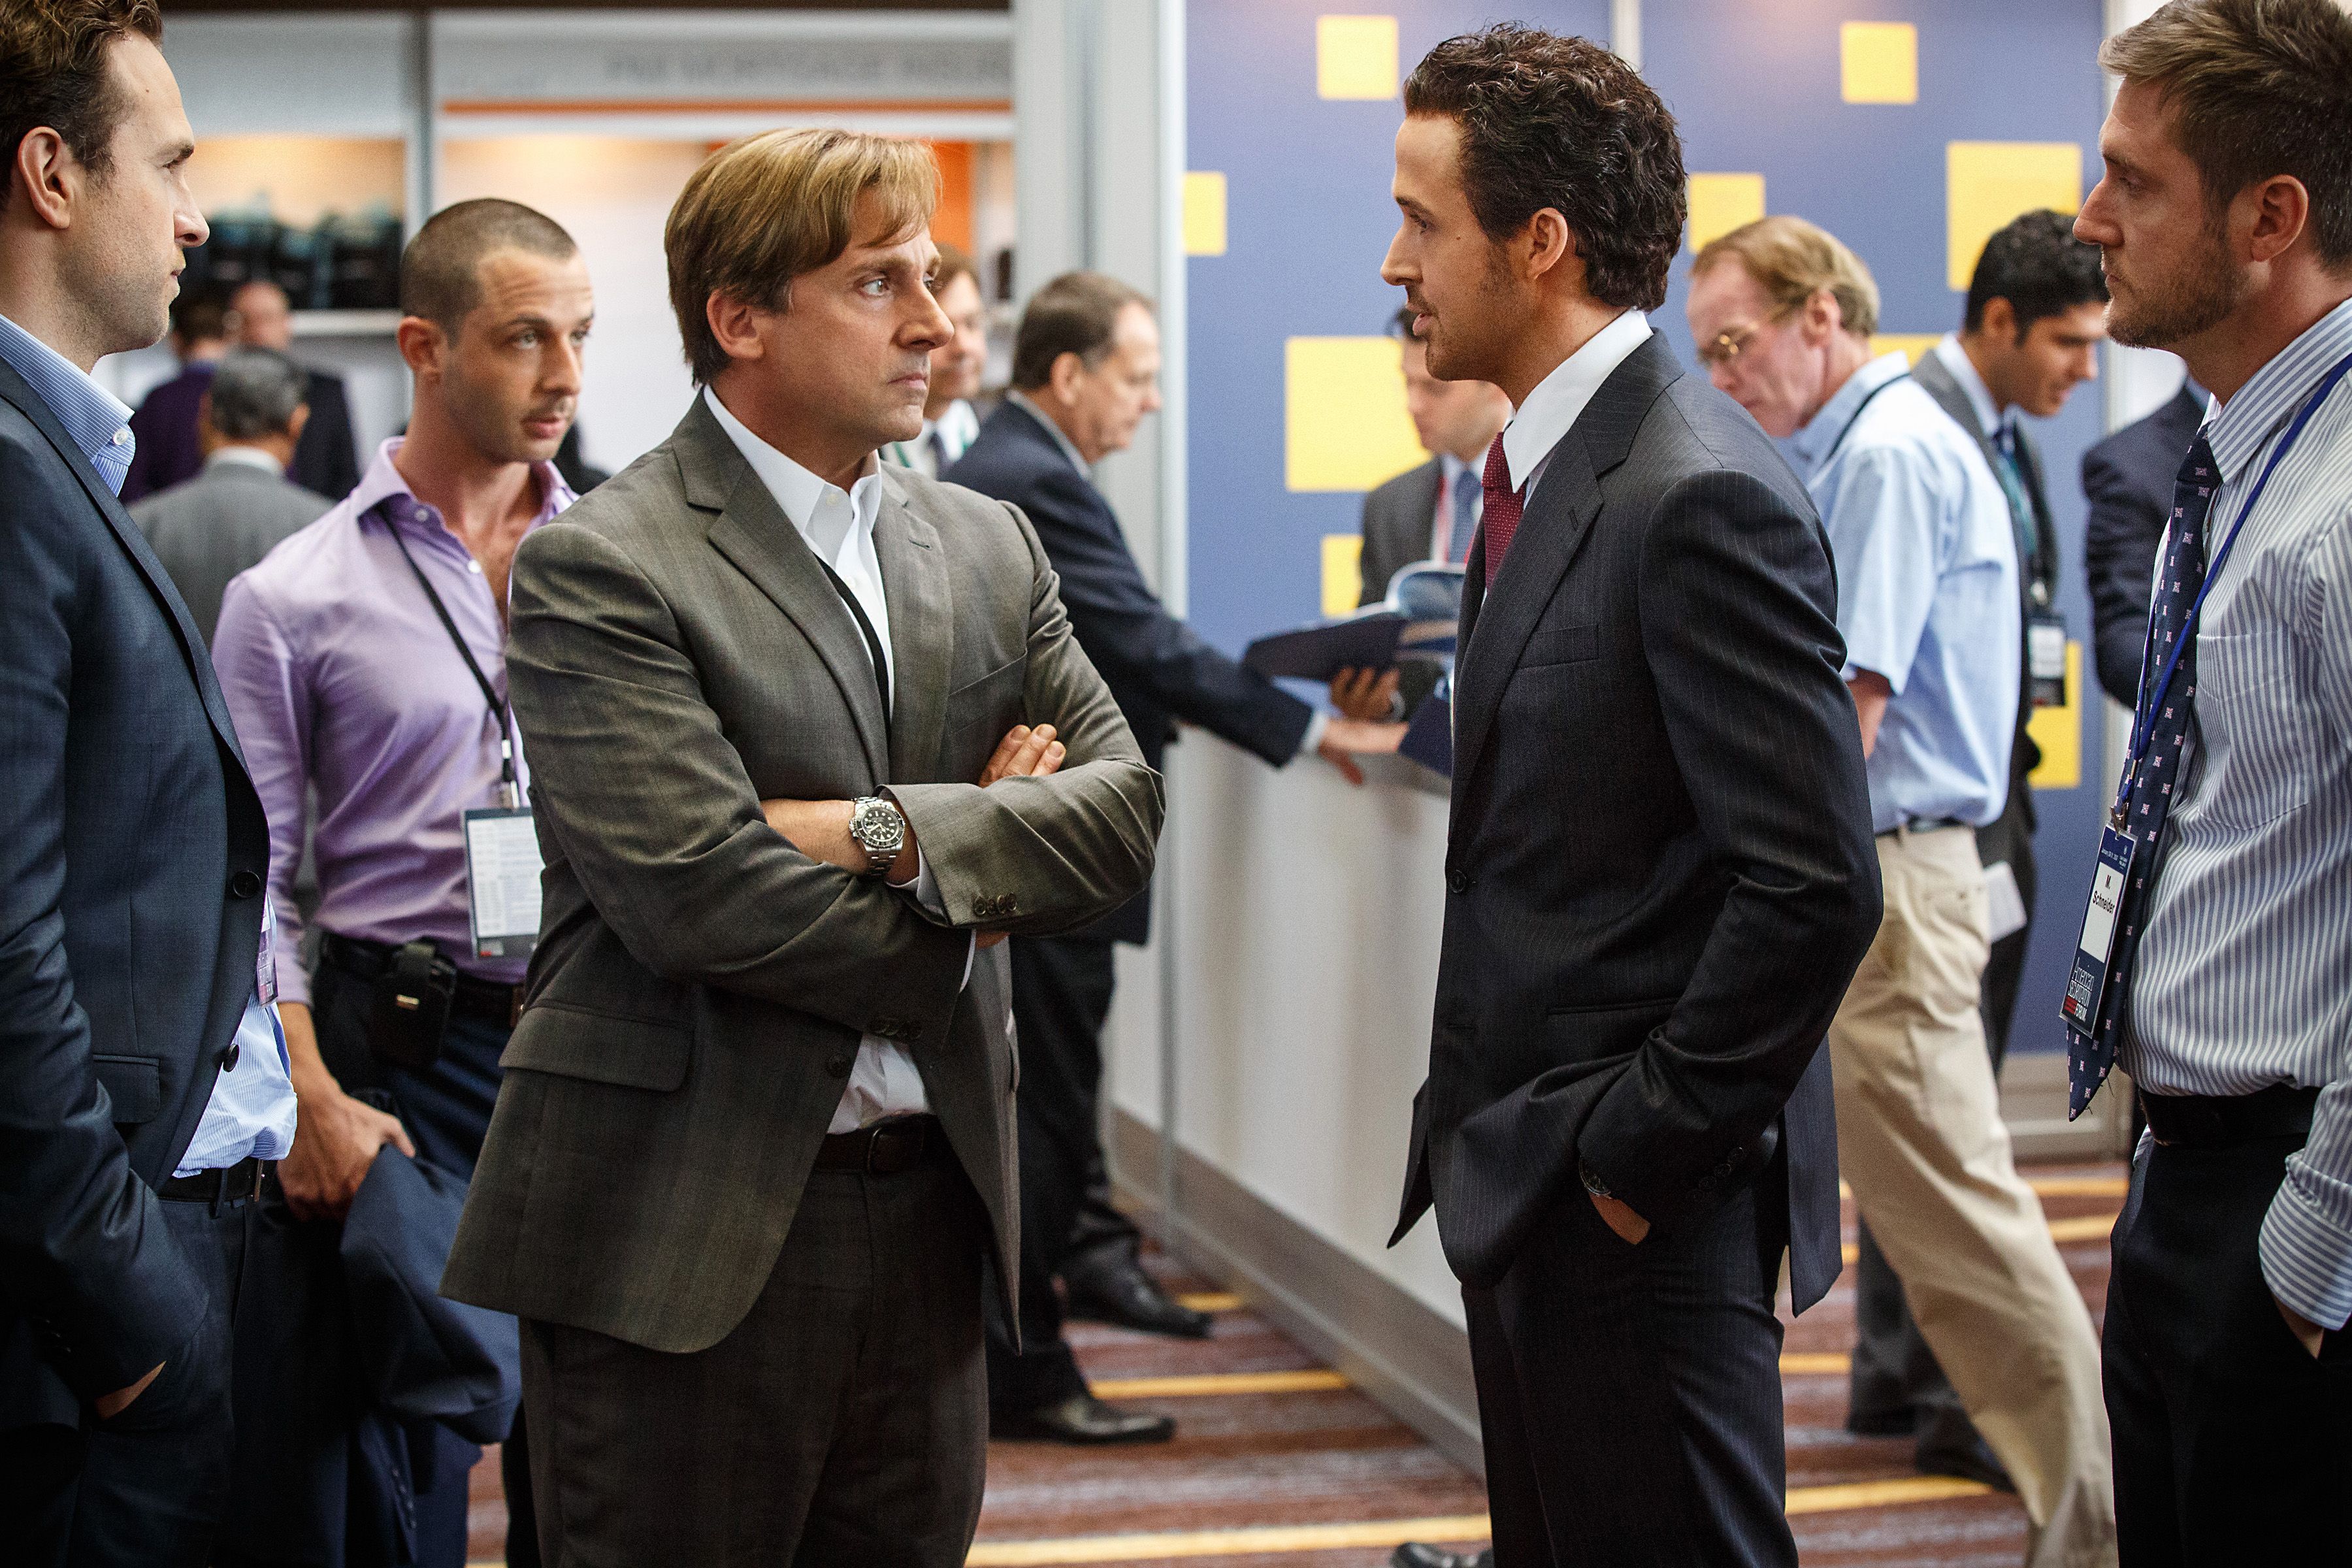 Ryan gosling and steve carell in 'the big short'